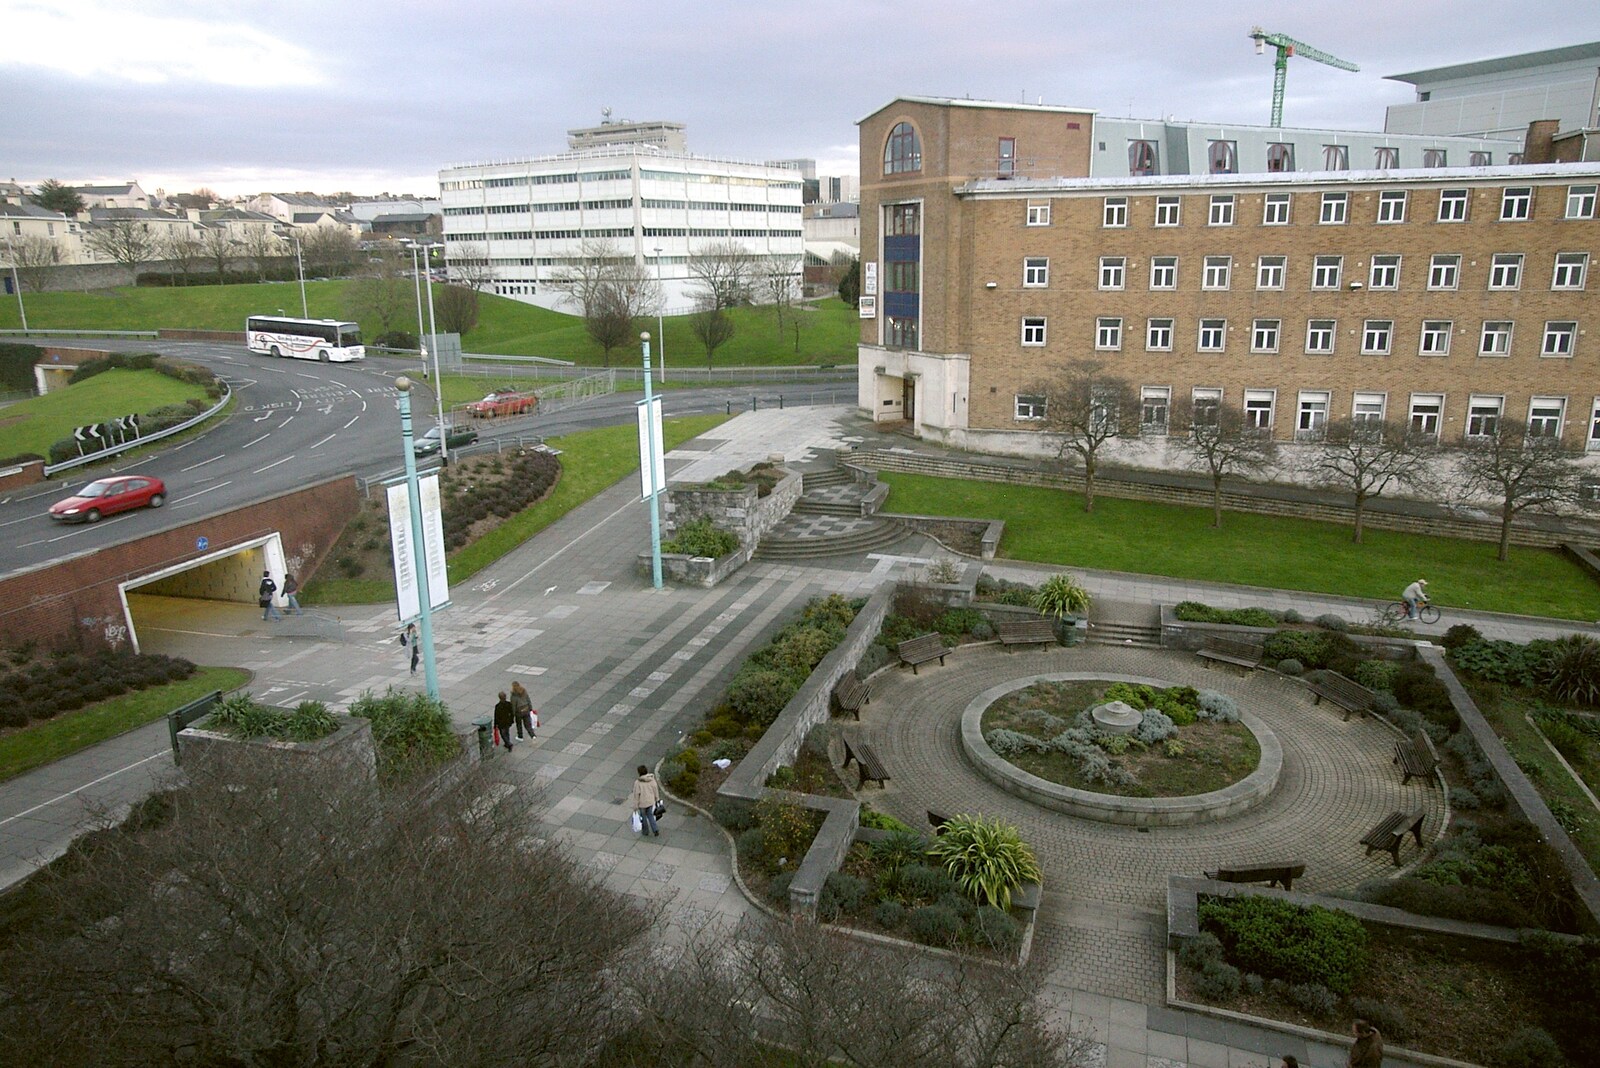 View from the Copthorne Hotel over North Cross from Uni: A Wander Around the Campus, Plymouth, Devon - 18th December 2005